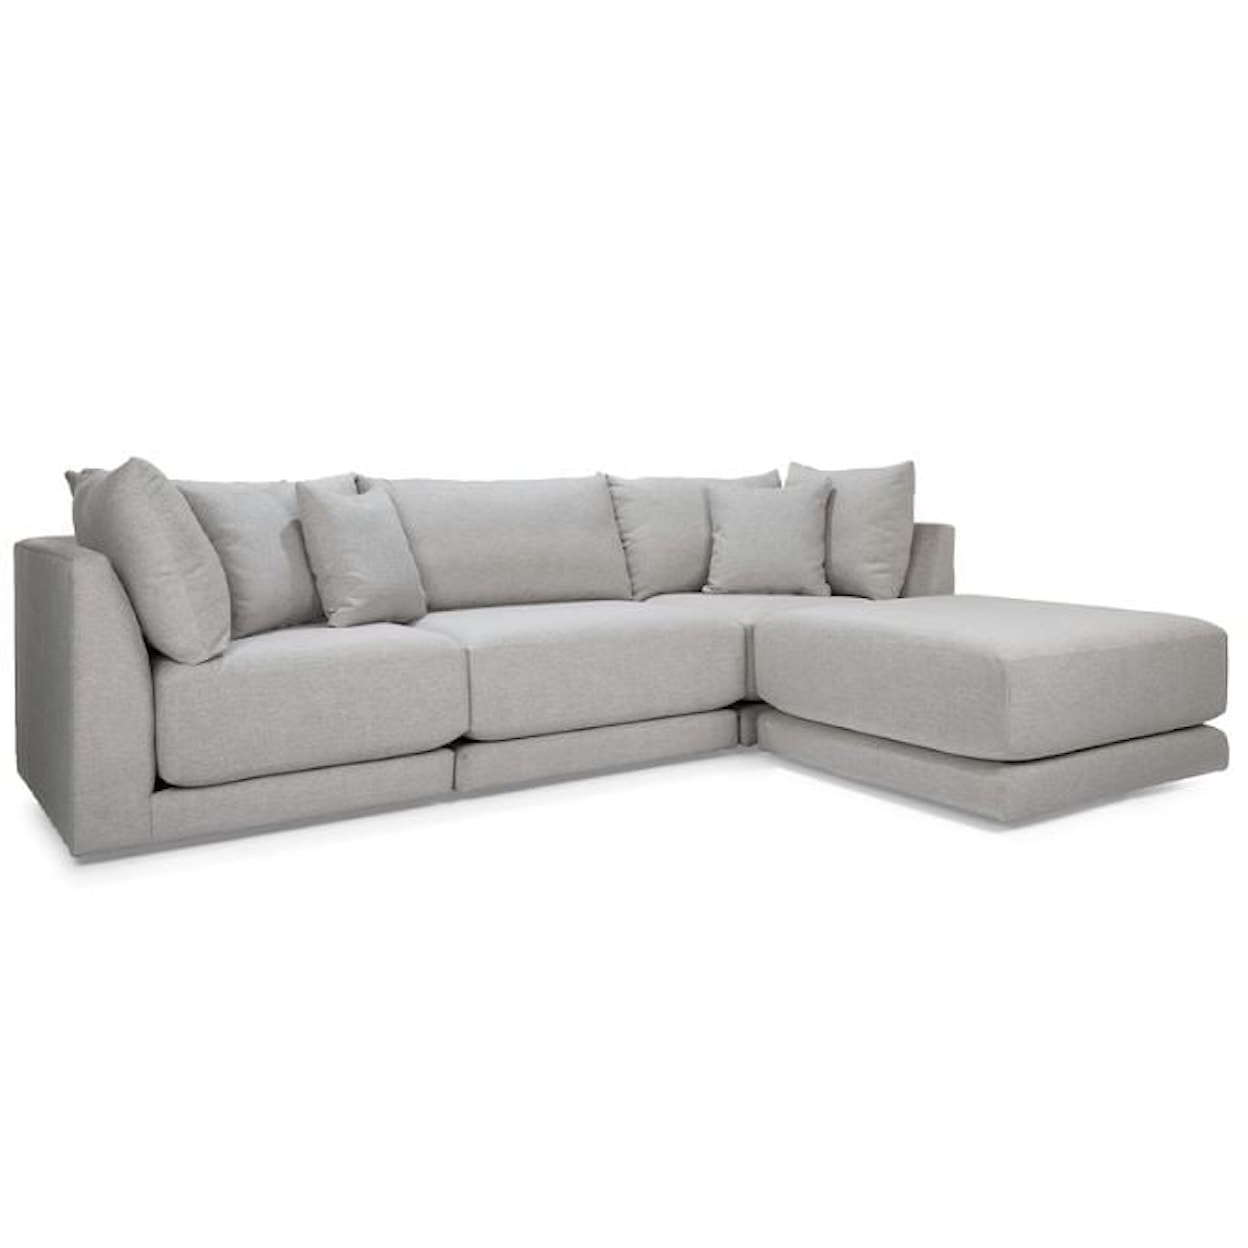 Superstyle Lynney 3 Piece Sectional - Ottoman Not Included